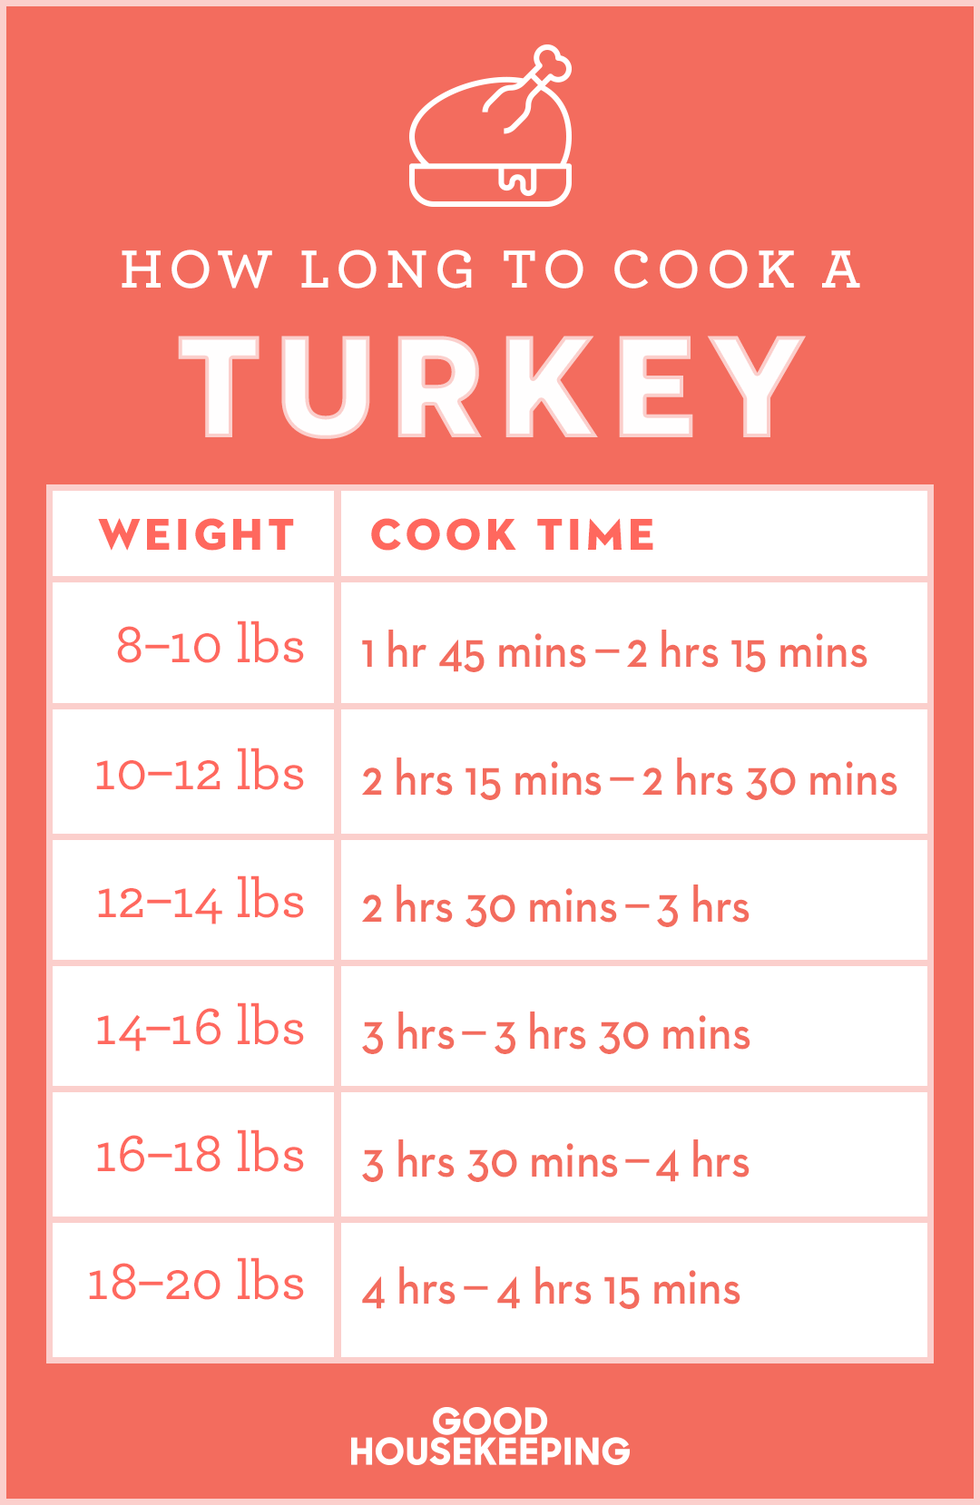 How Long to Cook a Turkey: Cooking Times, Temperatures and Tips